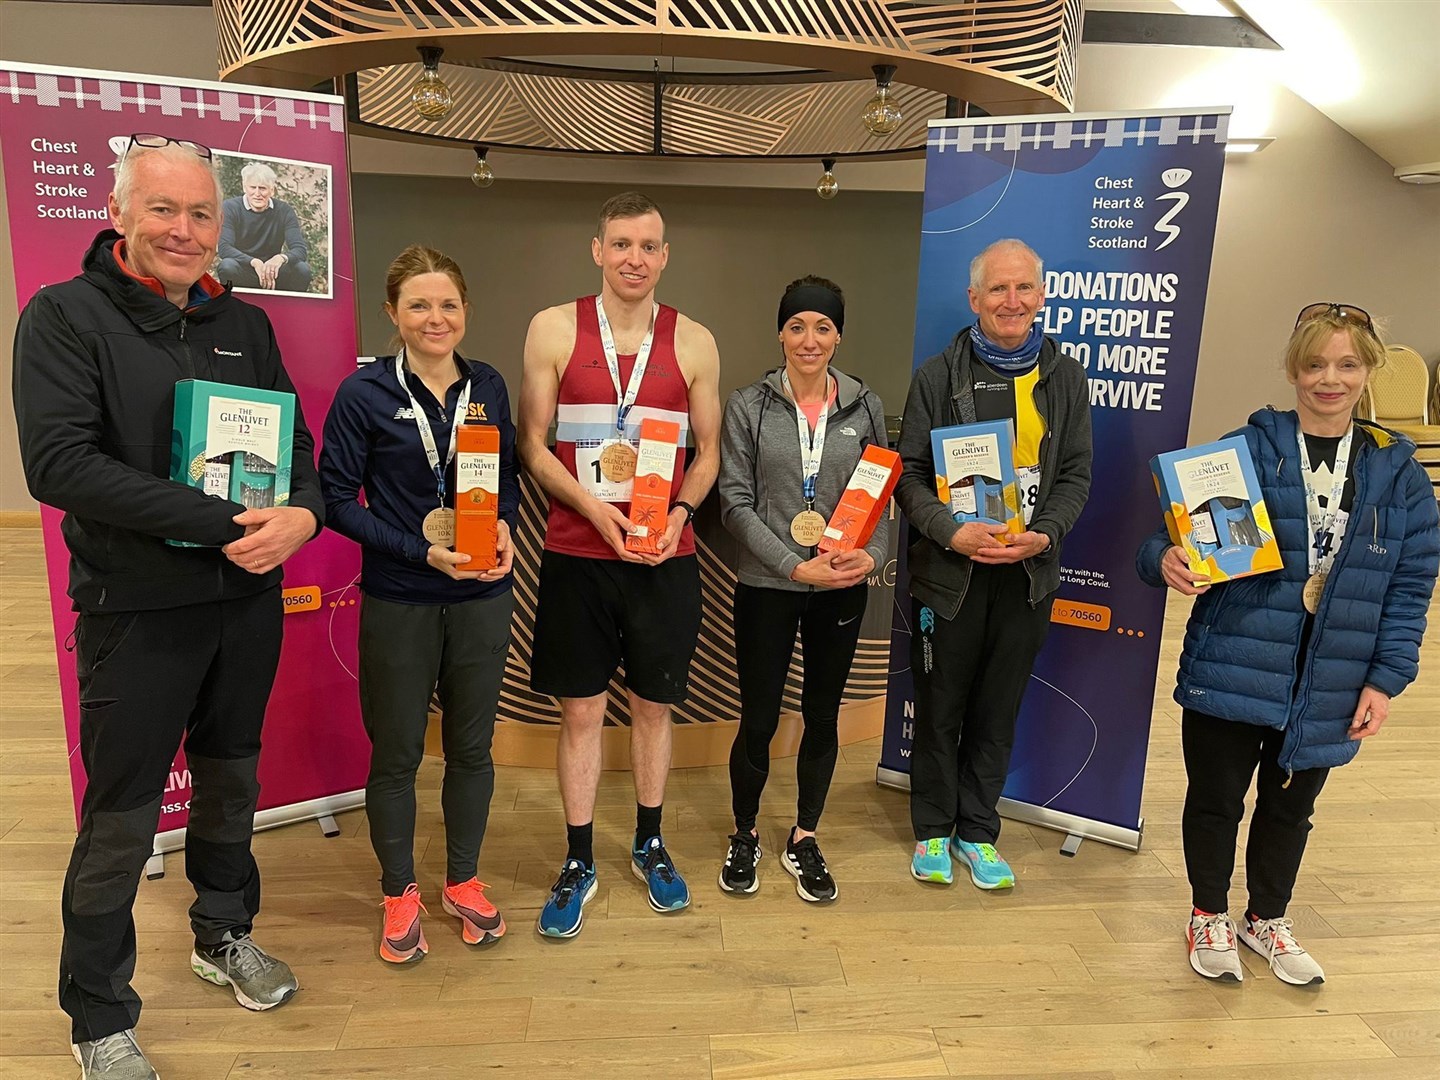 L-R: Robert Keenan (Fastest male veteran), Claire Howie (fastest female super veteran), Isaac Mann (fastest overall), Amy Hudson (fastest female senior), George McPherson (fastest male vintage) and Mary Mowat (fastest female vintage).